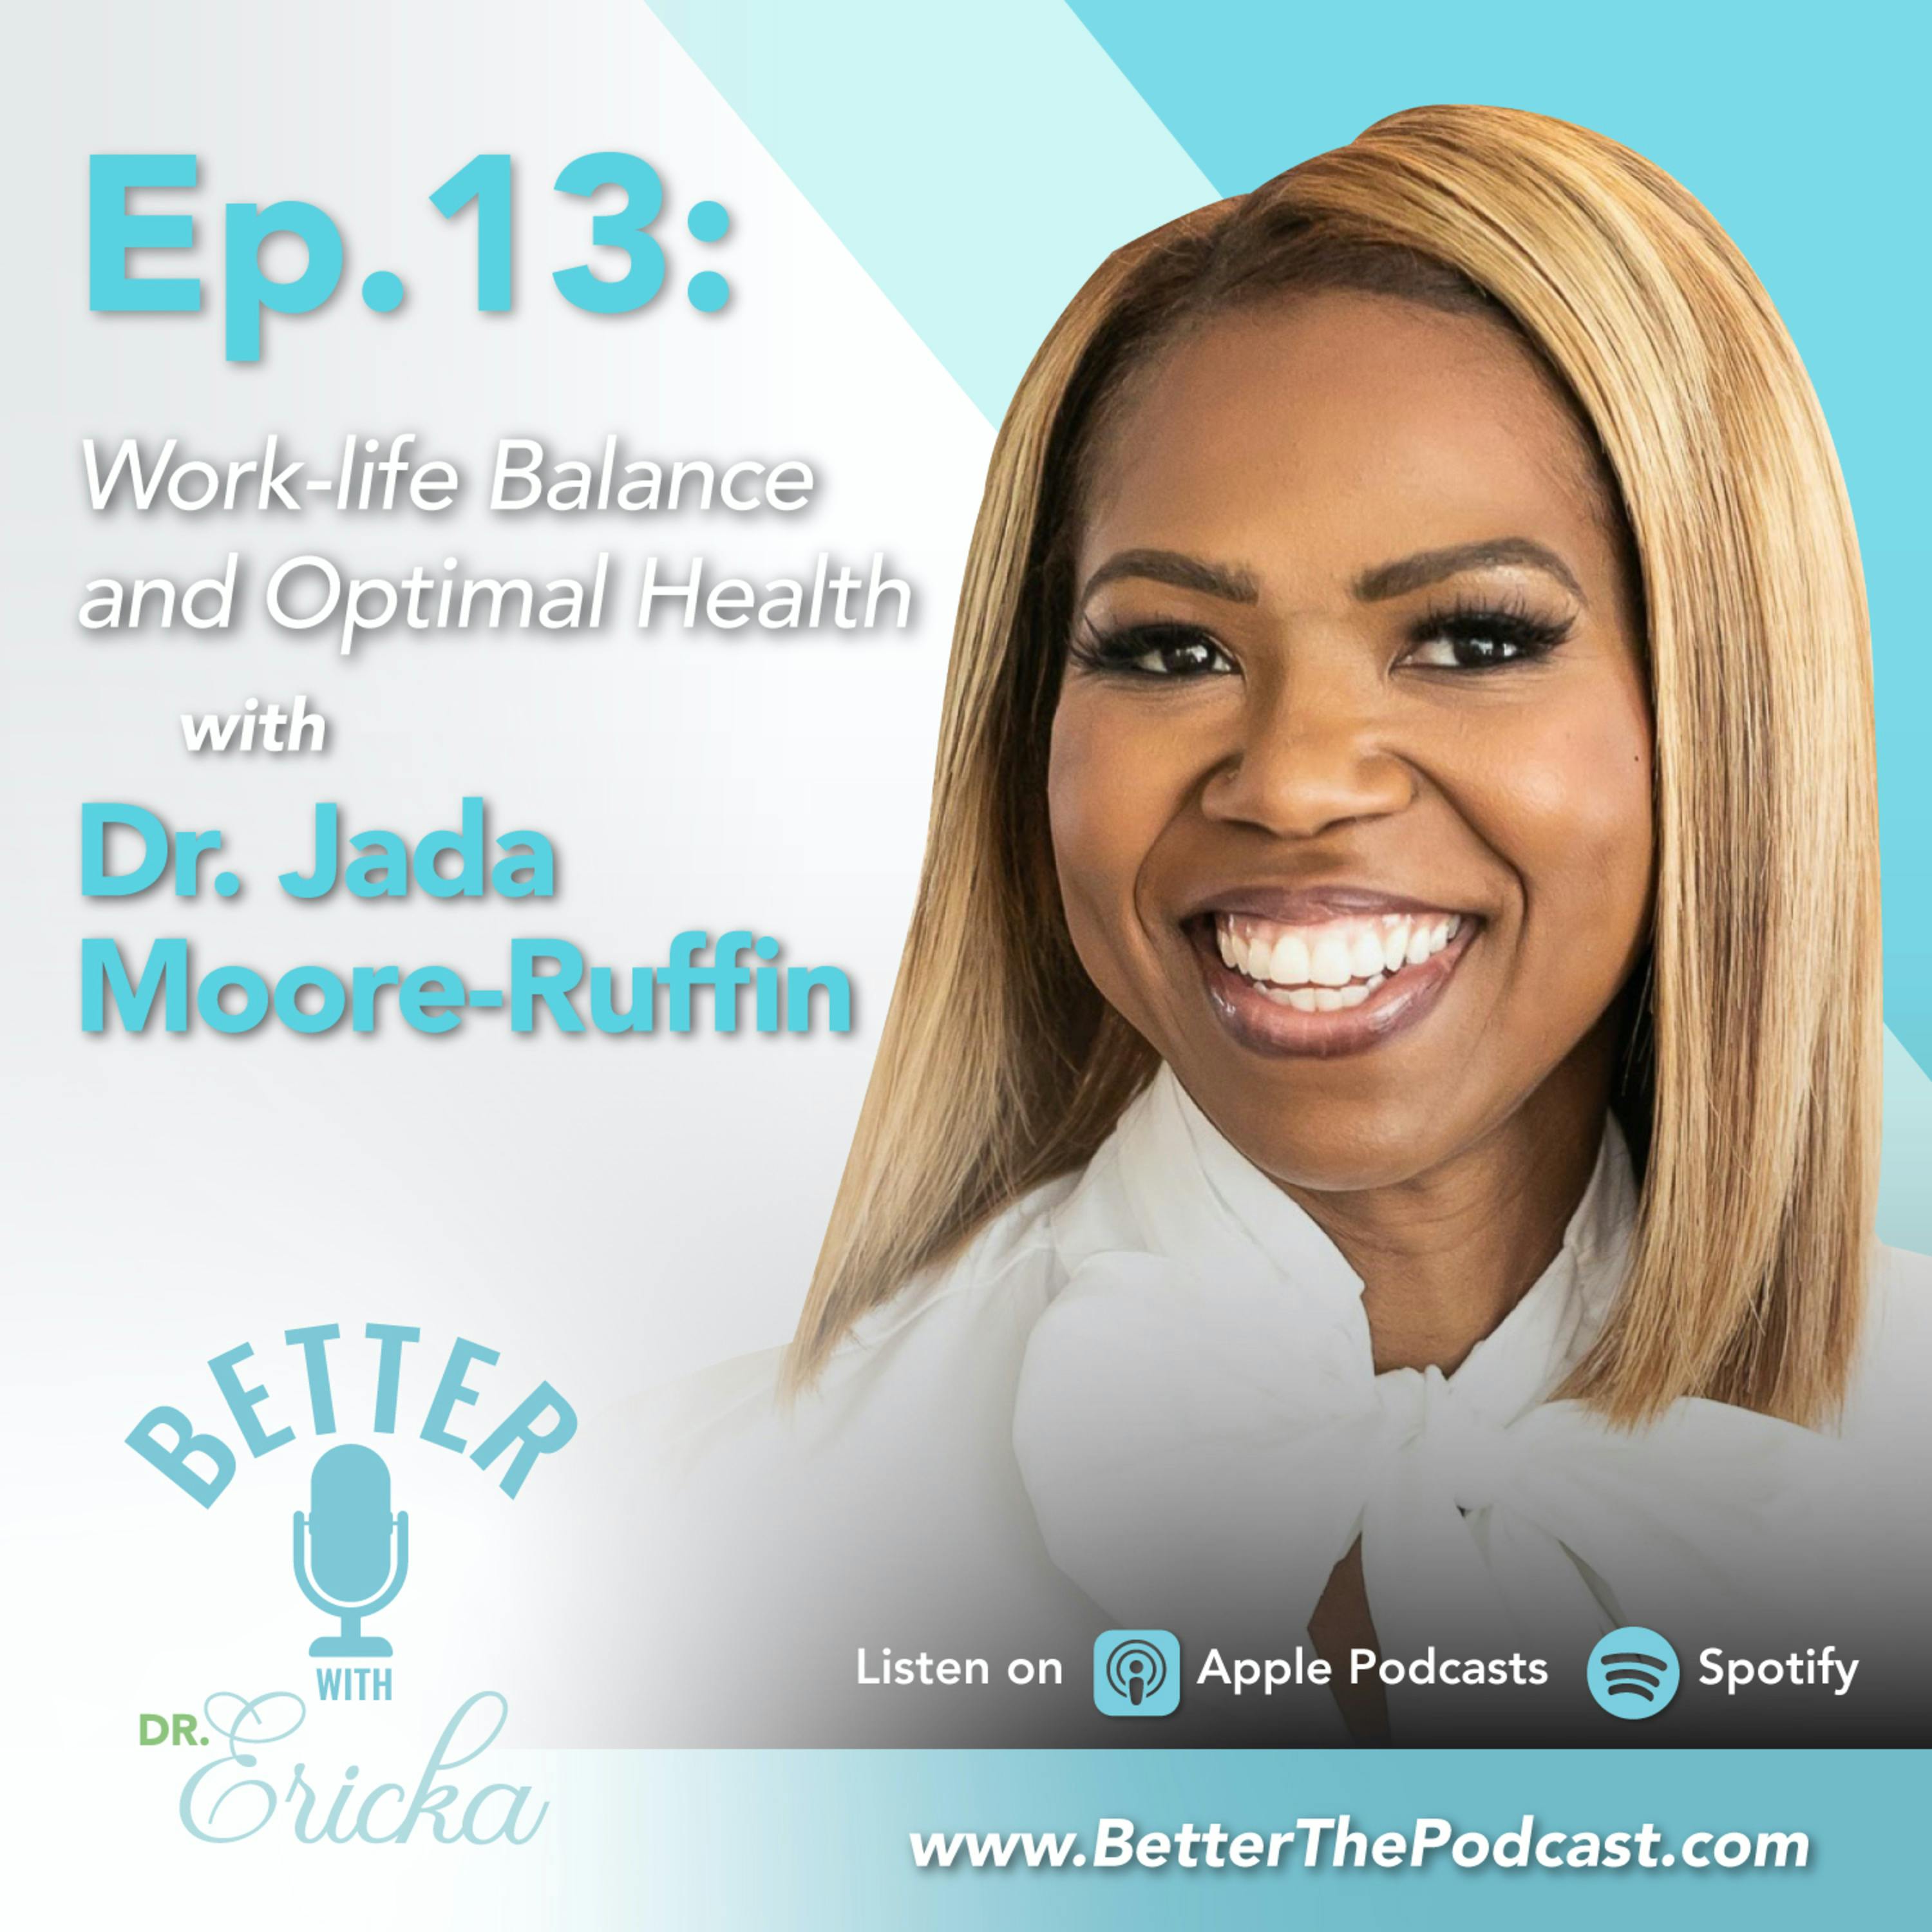 Work-Life Balance and Optimal Health with Dr. Jada Moore-Ruffin